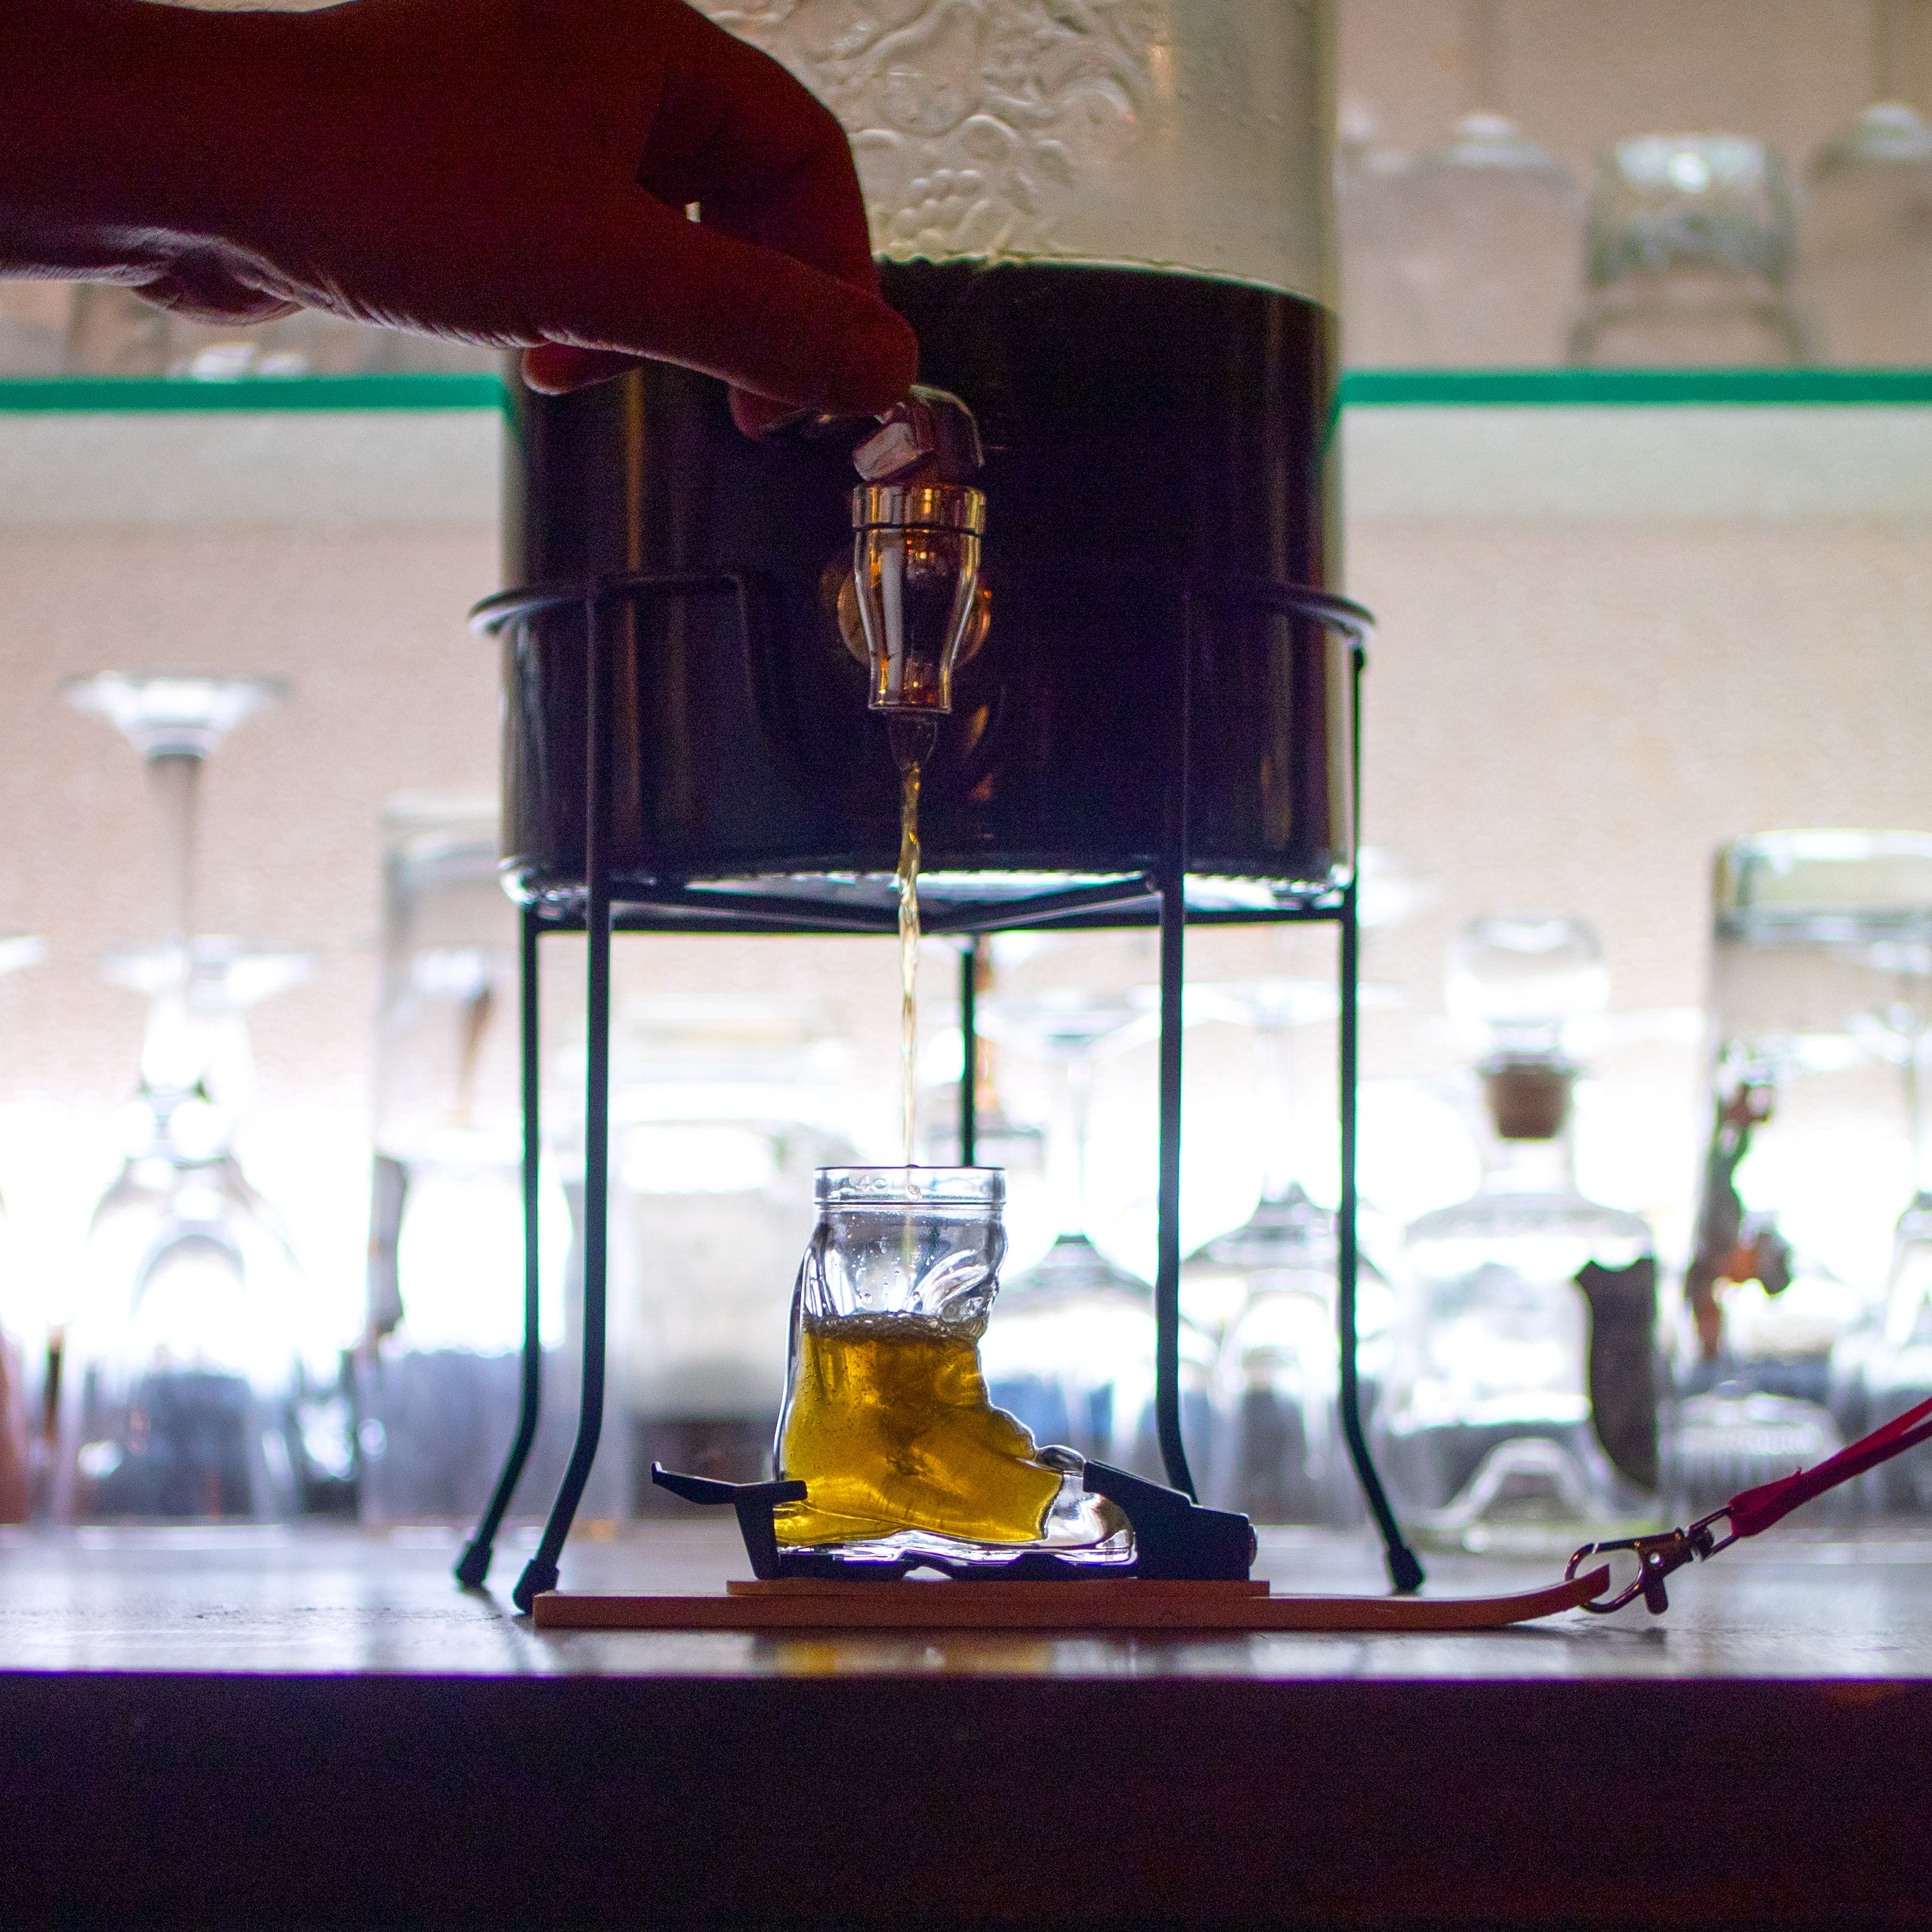 Photo of the mini-ski, fitted with the ski boot shot glass and bindings, underneath a glass drinks dispenser. A hand touches the lever pour the liquid from the dispenser into the shot glass. Against a backdrop of shelves of bar glassware